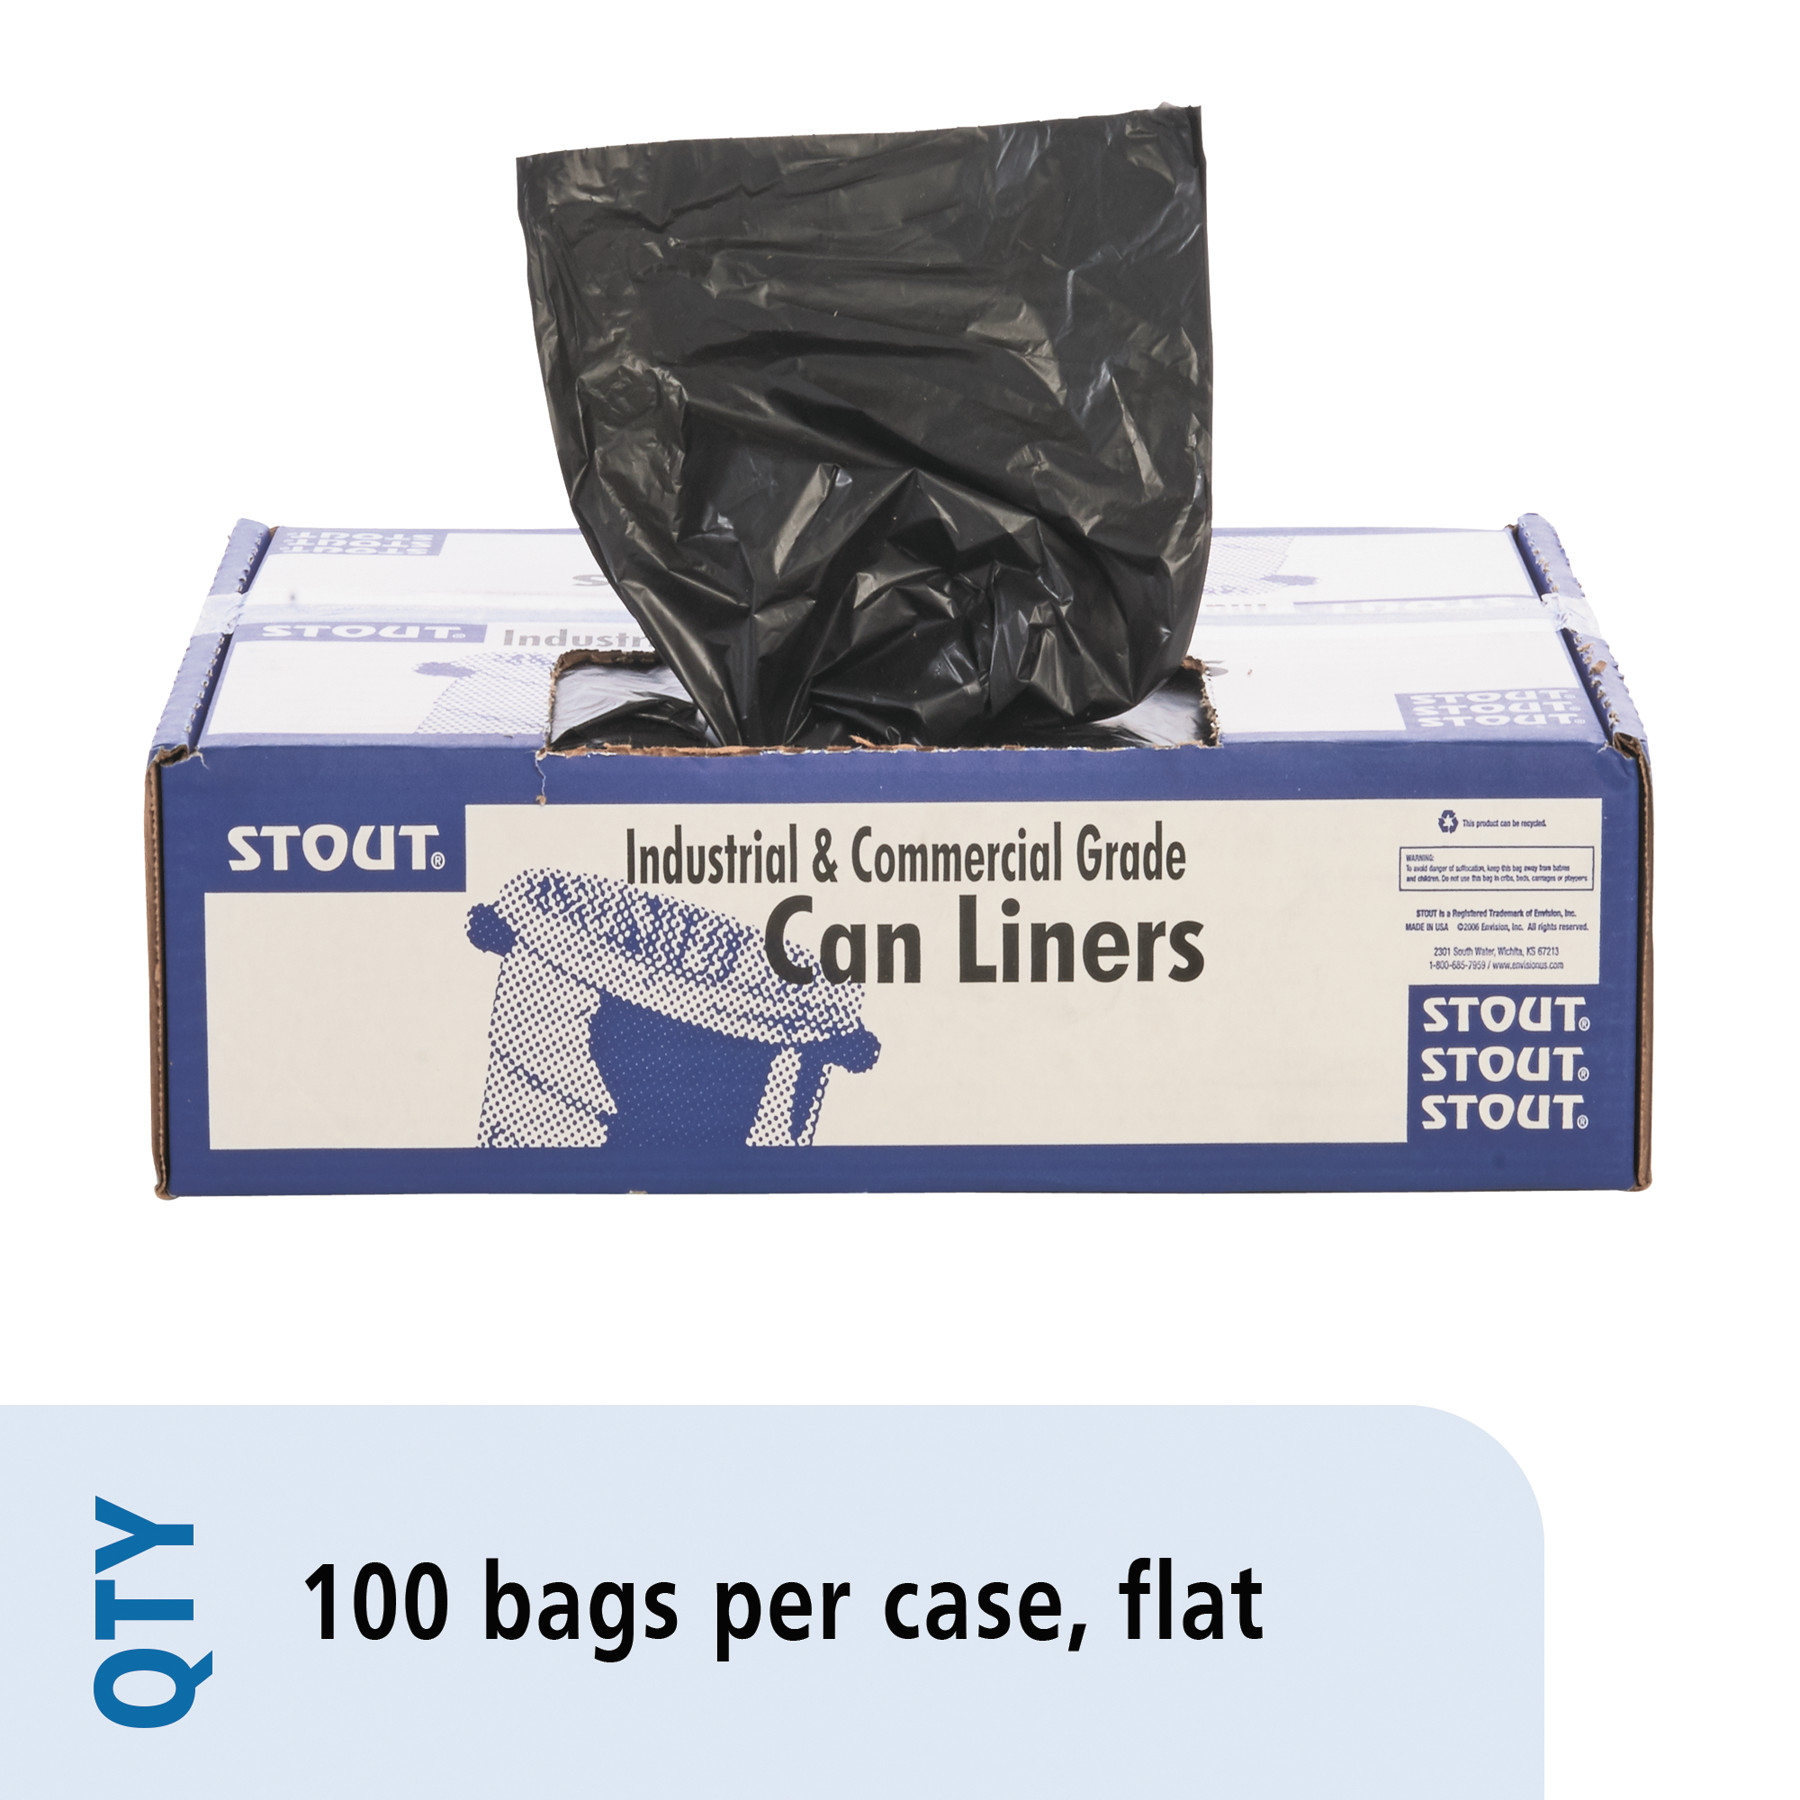  Stout by Envision T3658B15 Total Recycled Content Plastic Trash Bags, 60 gal, 1.5 mil, 36 x 58, Brown/Black, 100/Carton (STOT3658B15) 